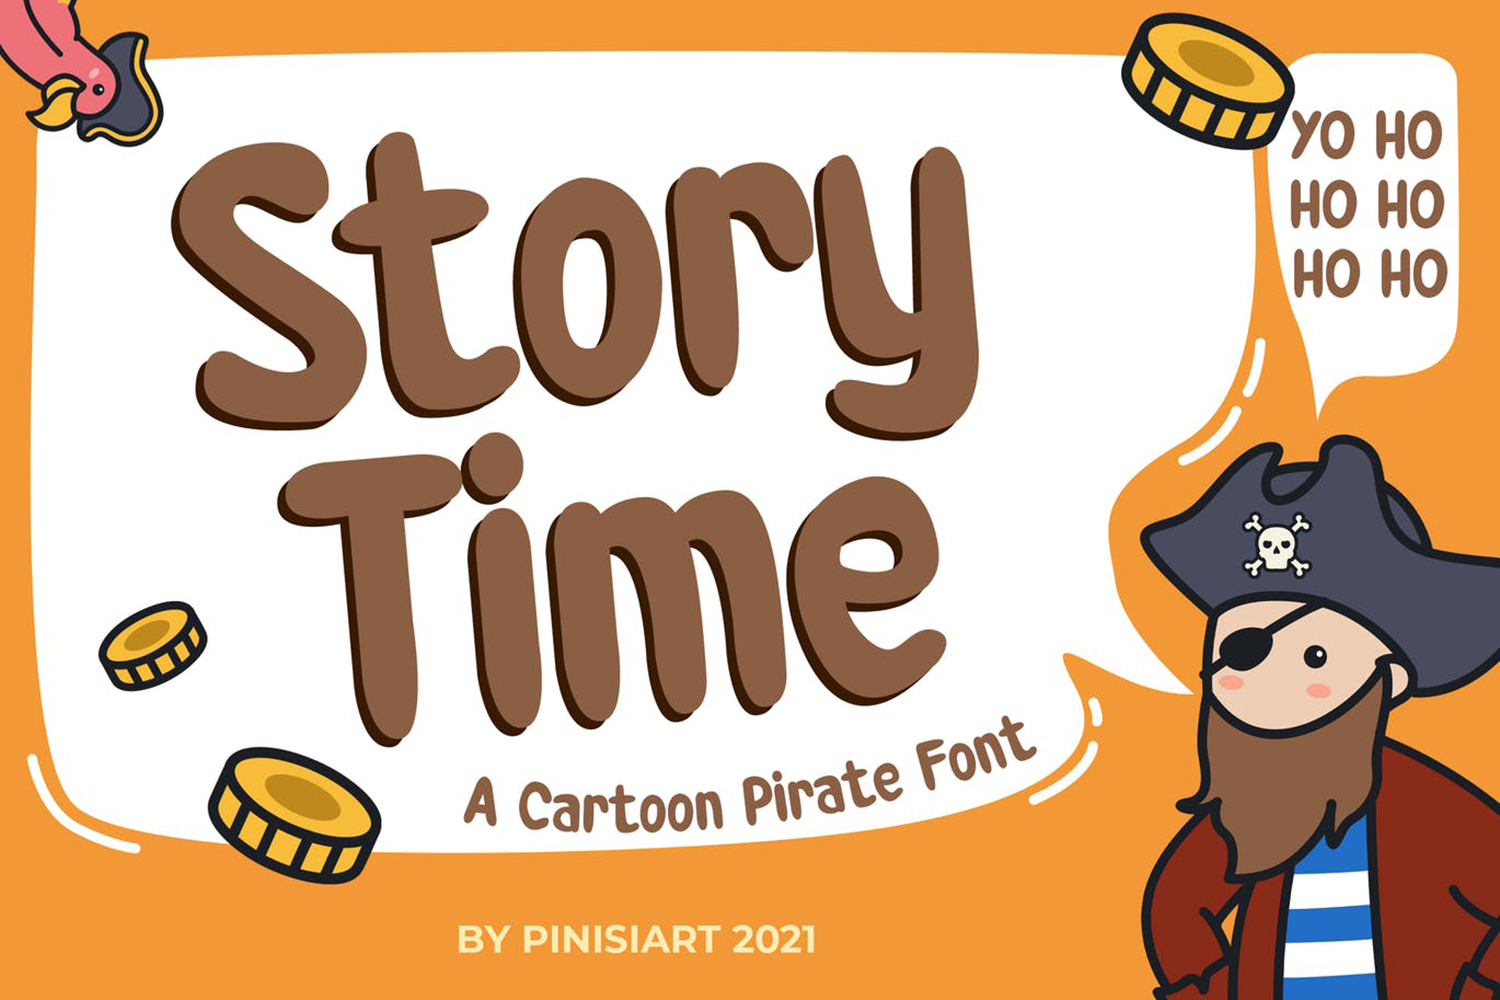 Storytime Free Font